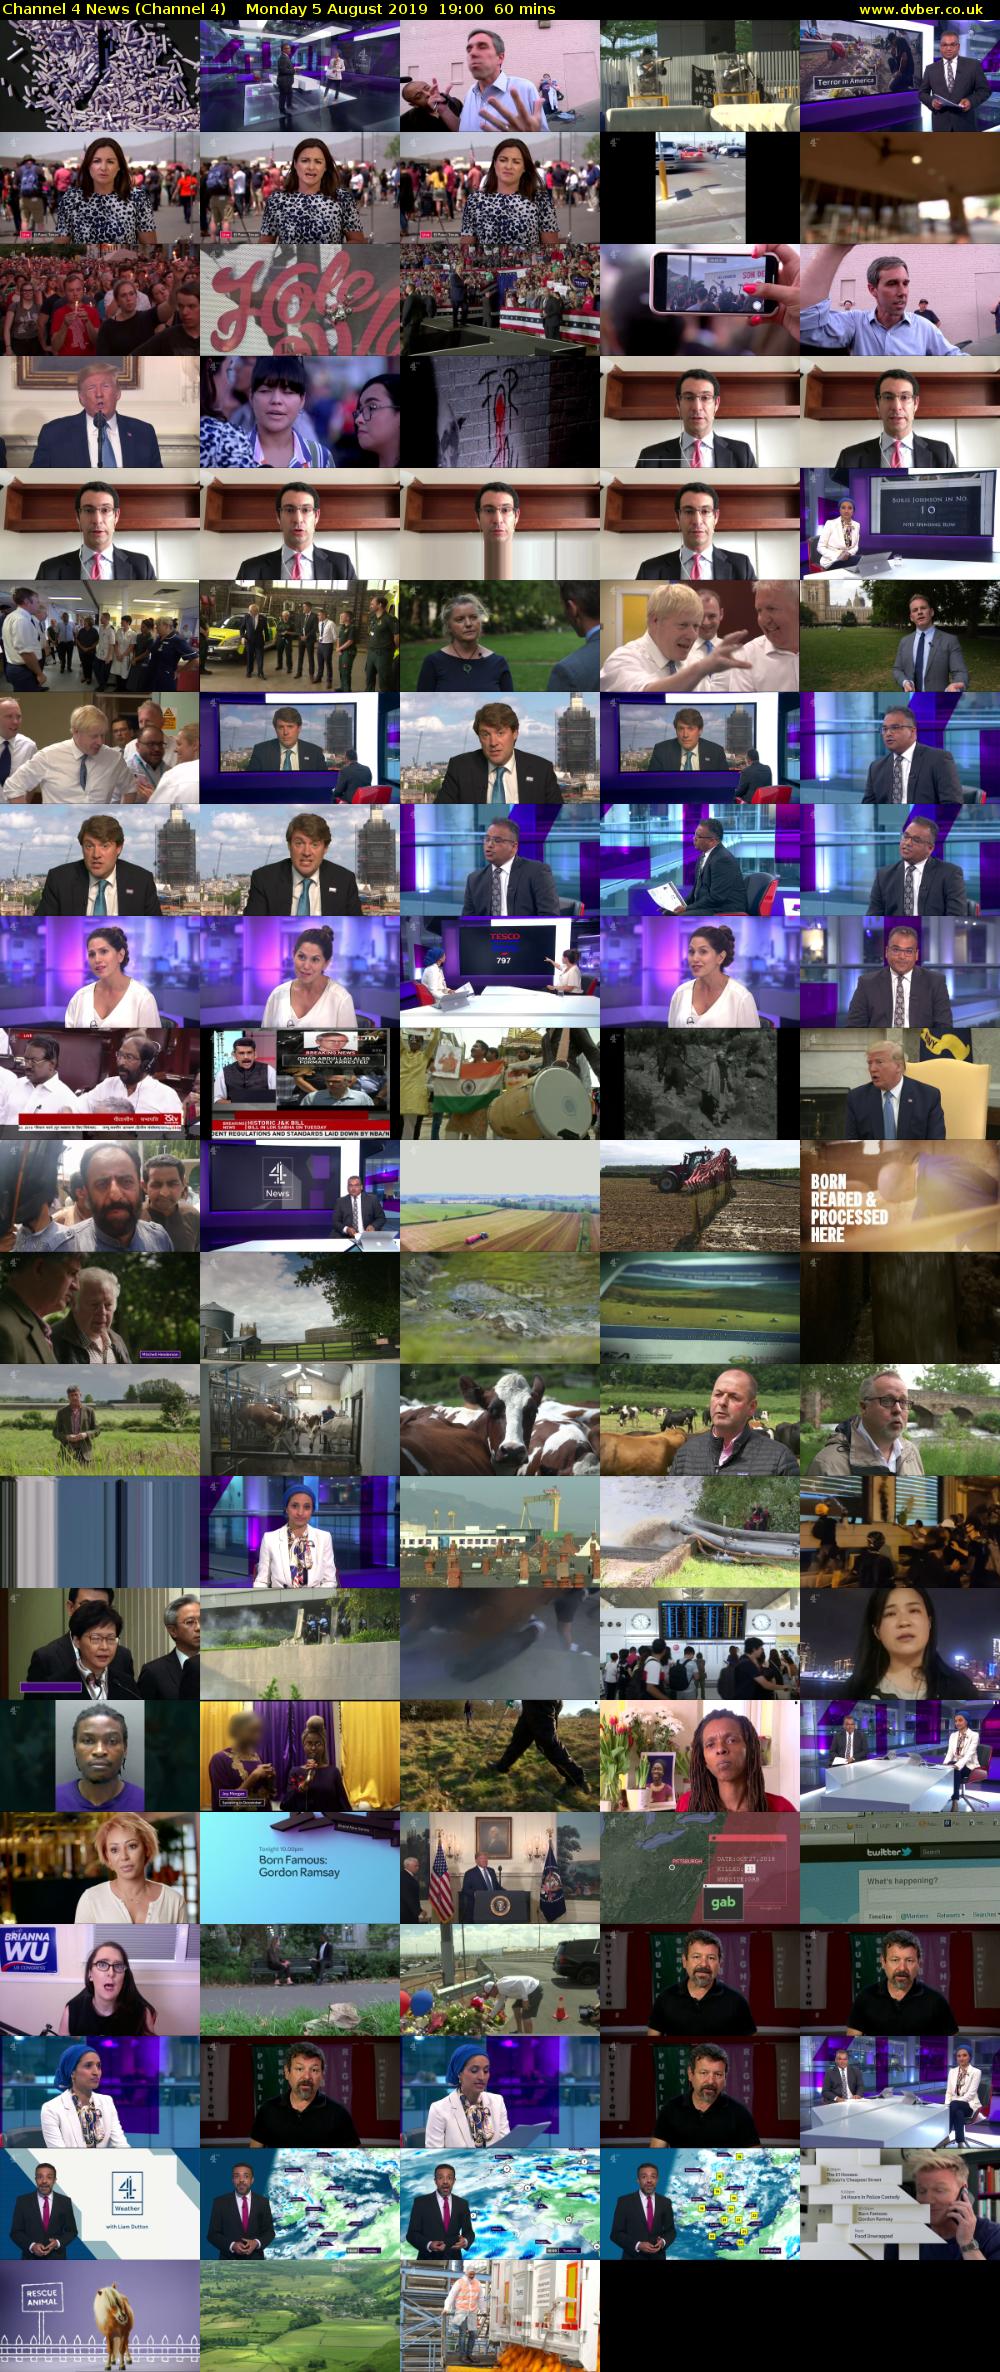 Channel 4 News (Channel 4) Monday 5 August 2019 19:00 - 20:00